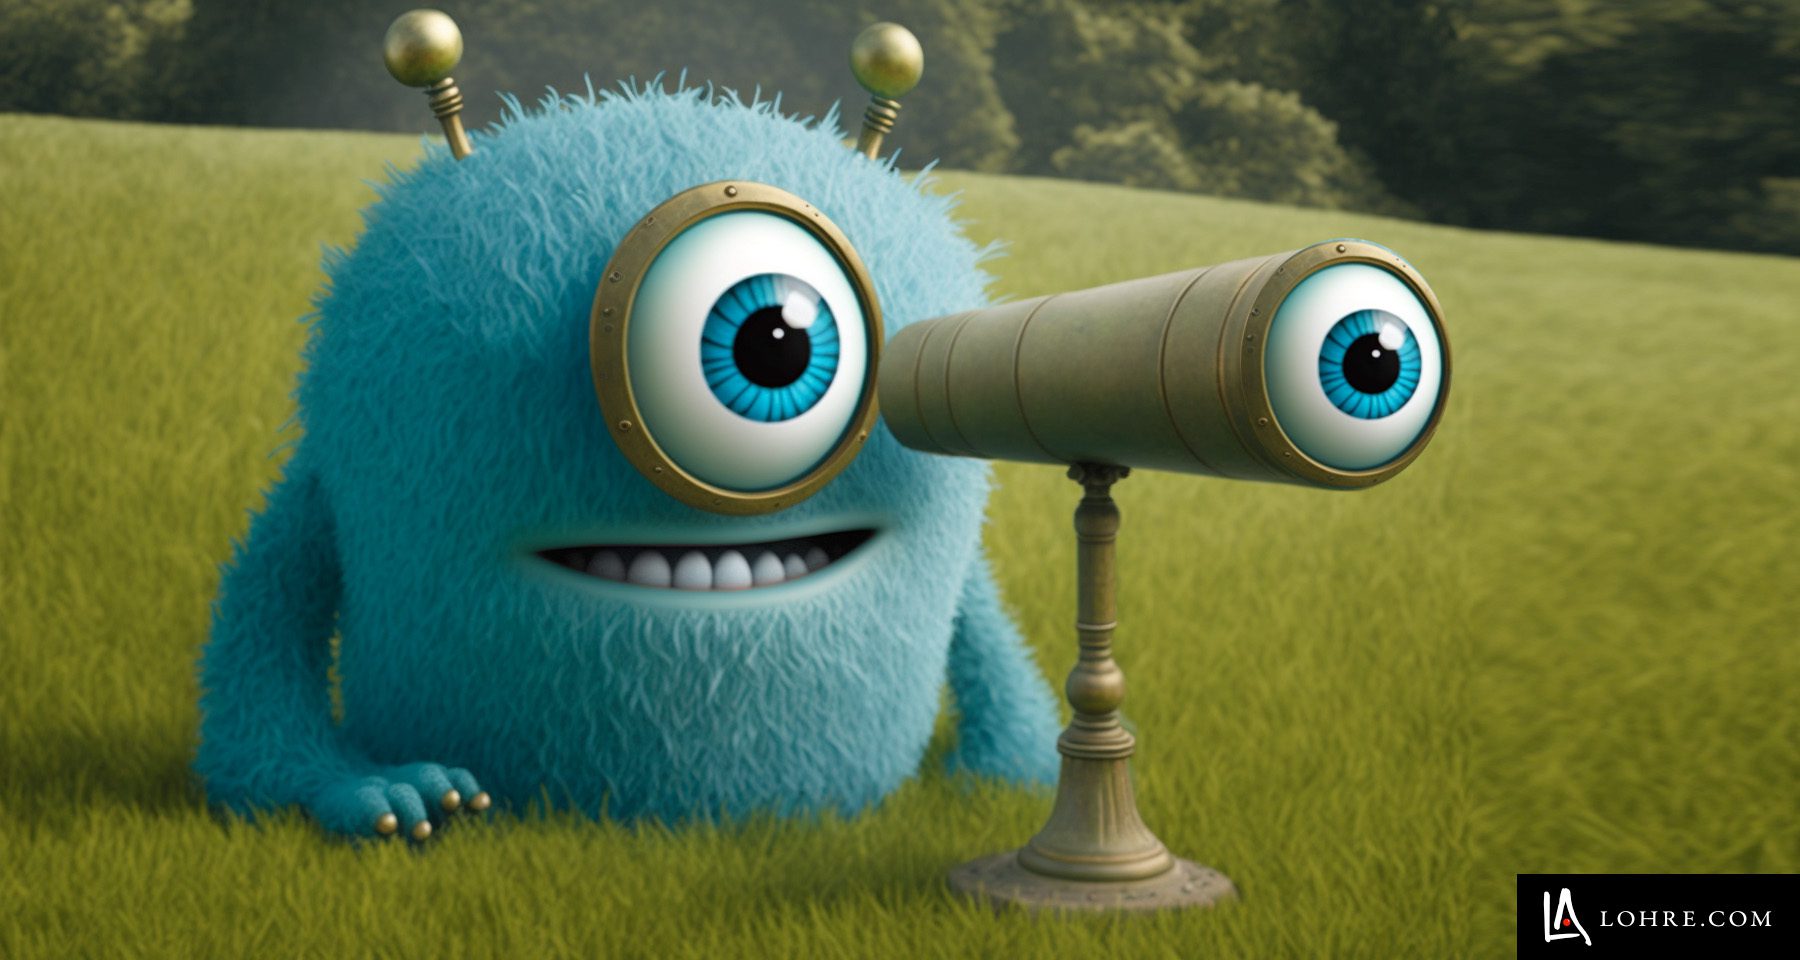 Cute monster looking through telescope as an image for industrial search engine marketing industrial SEM